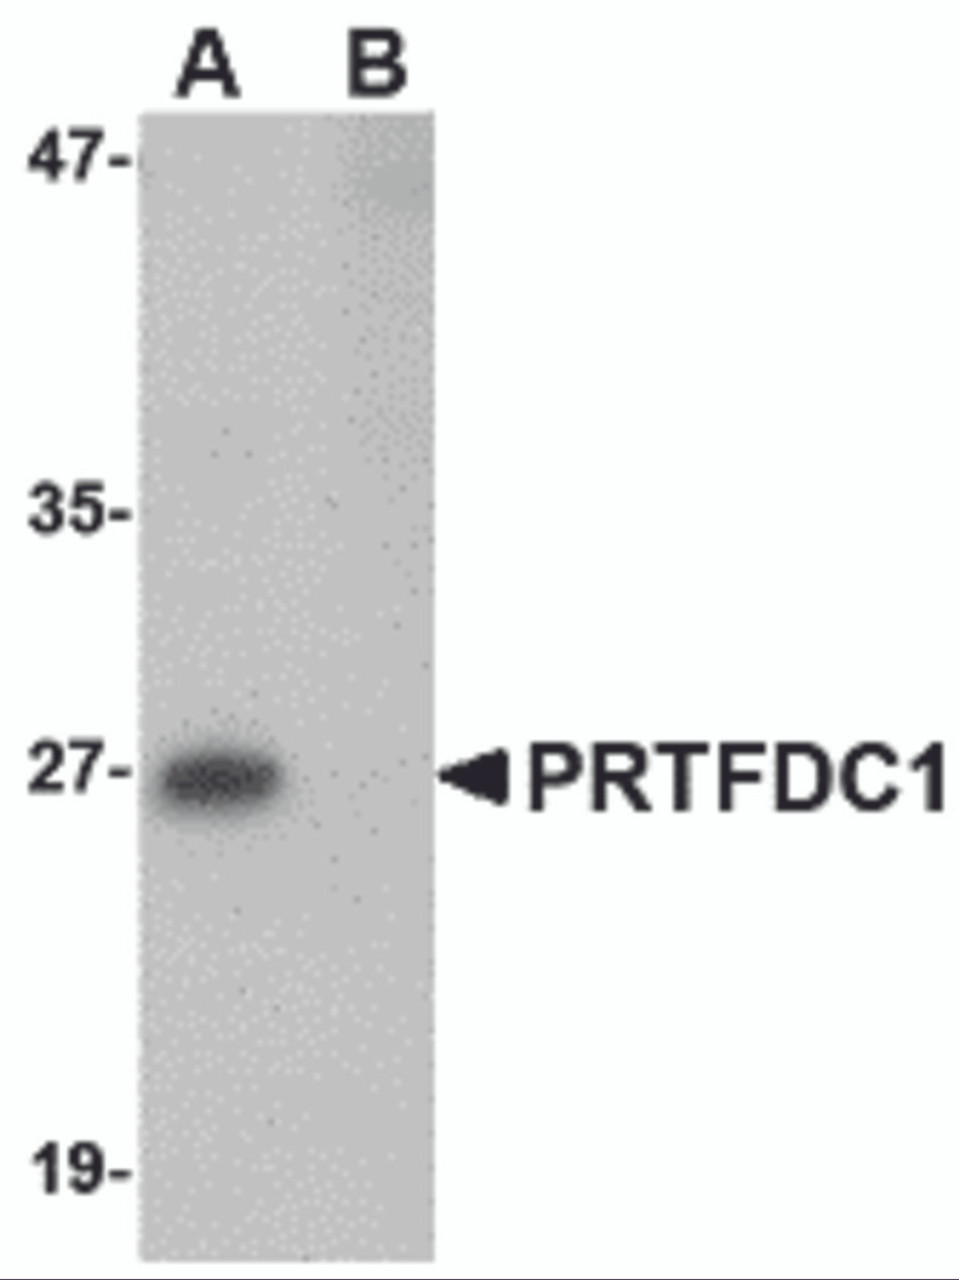 Western blot analysis of PRTFDC1 in human brain tissue lysate with PRTFDC1 antibody at 1 &#956;g/mL in the (A) absence and (B) presence of blocking peptide.